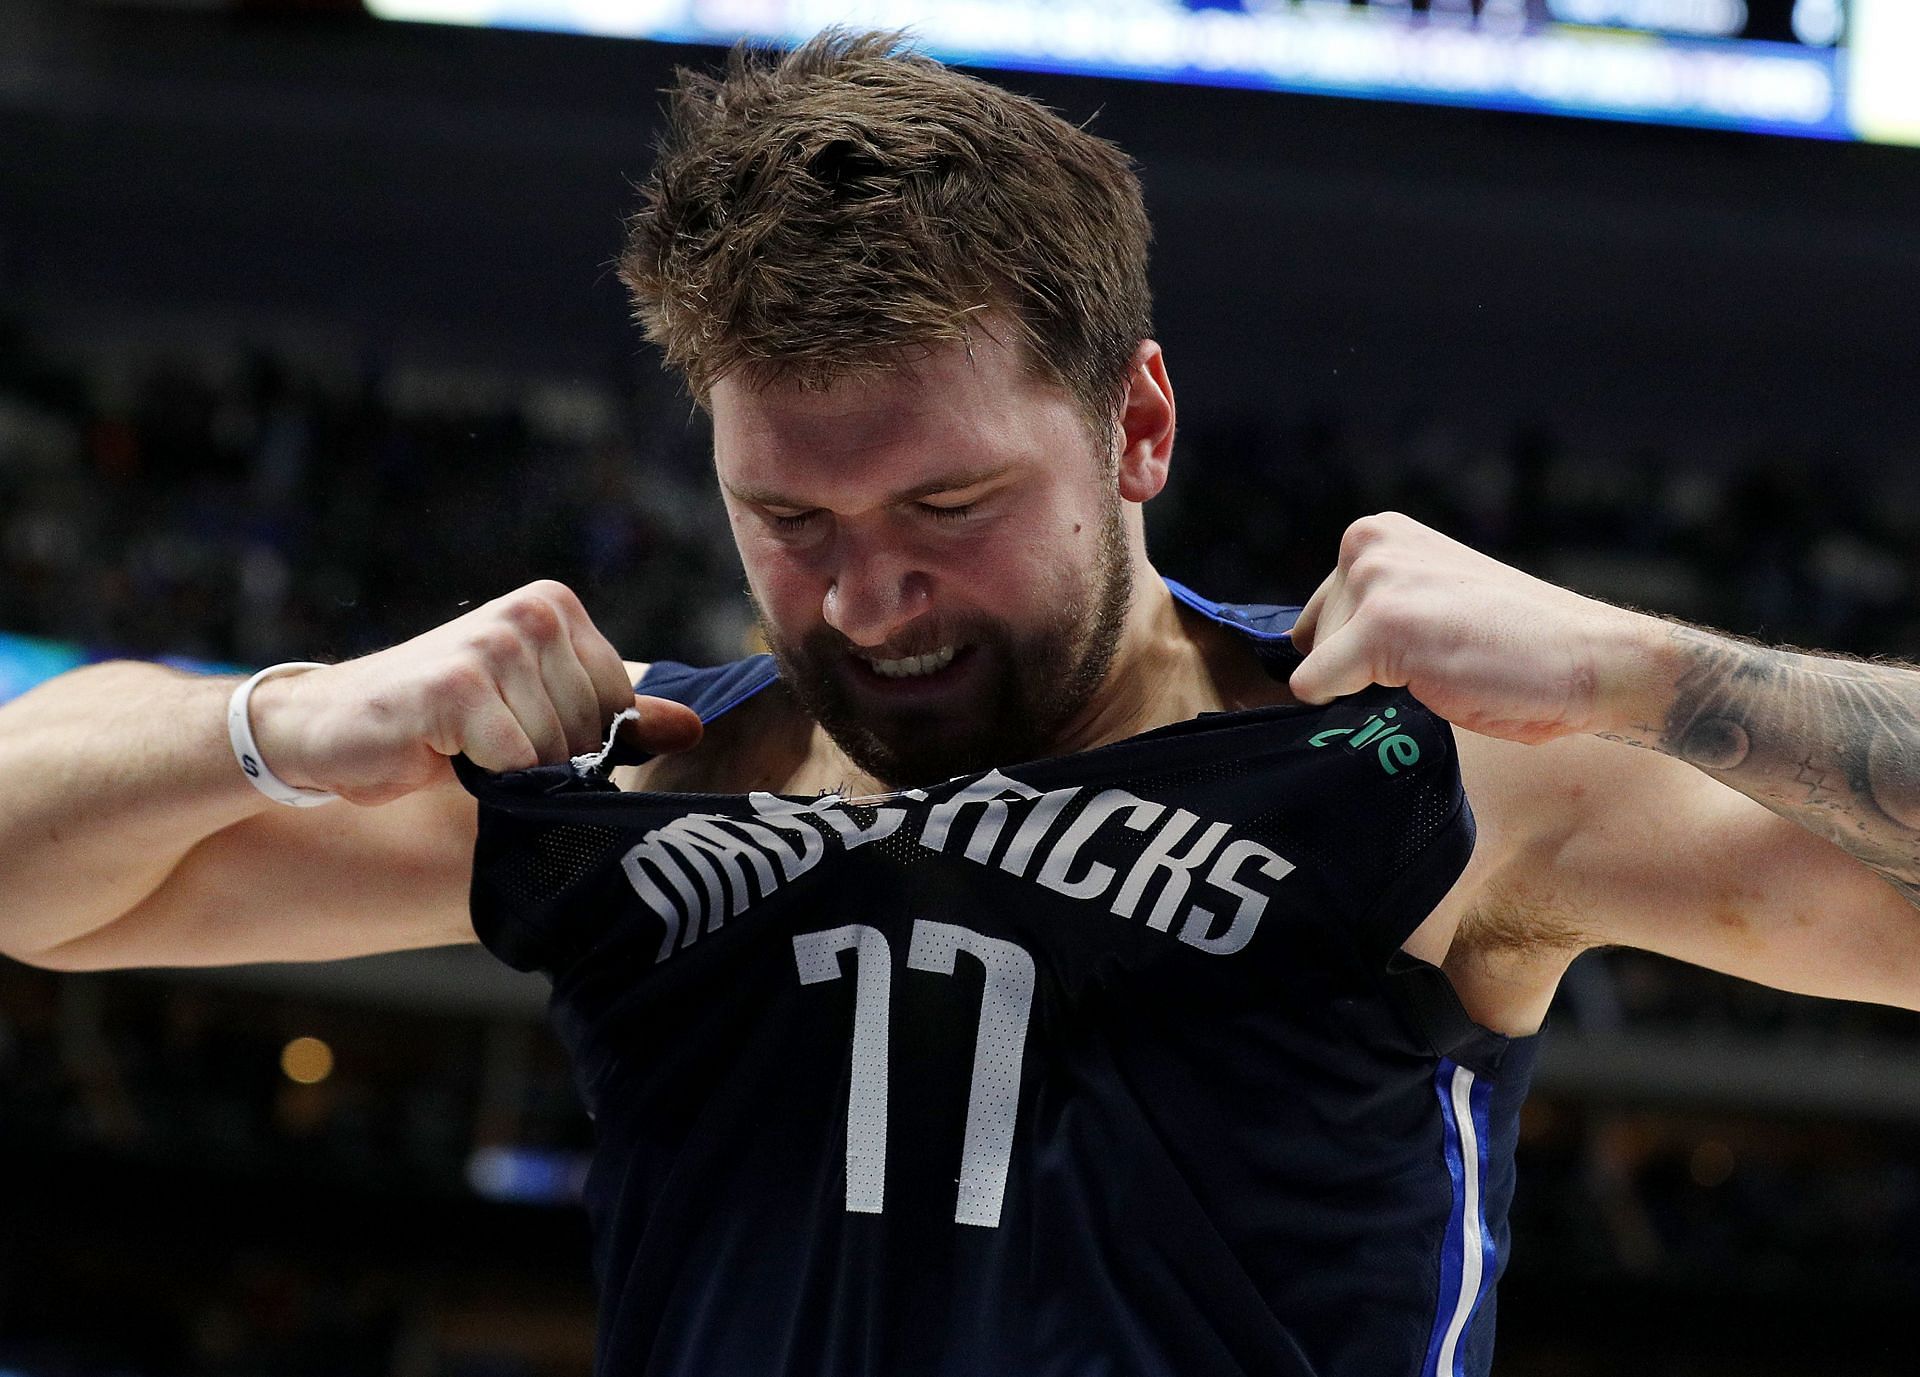 Luka Doncic of the Dallas Mavericks rips his jersey as he walks off the court